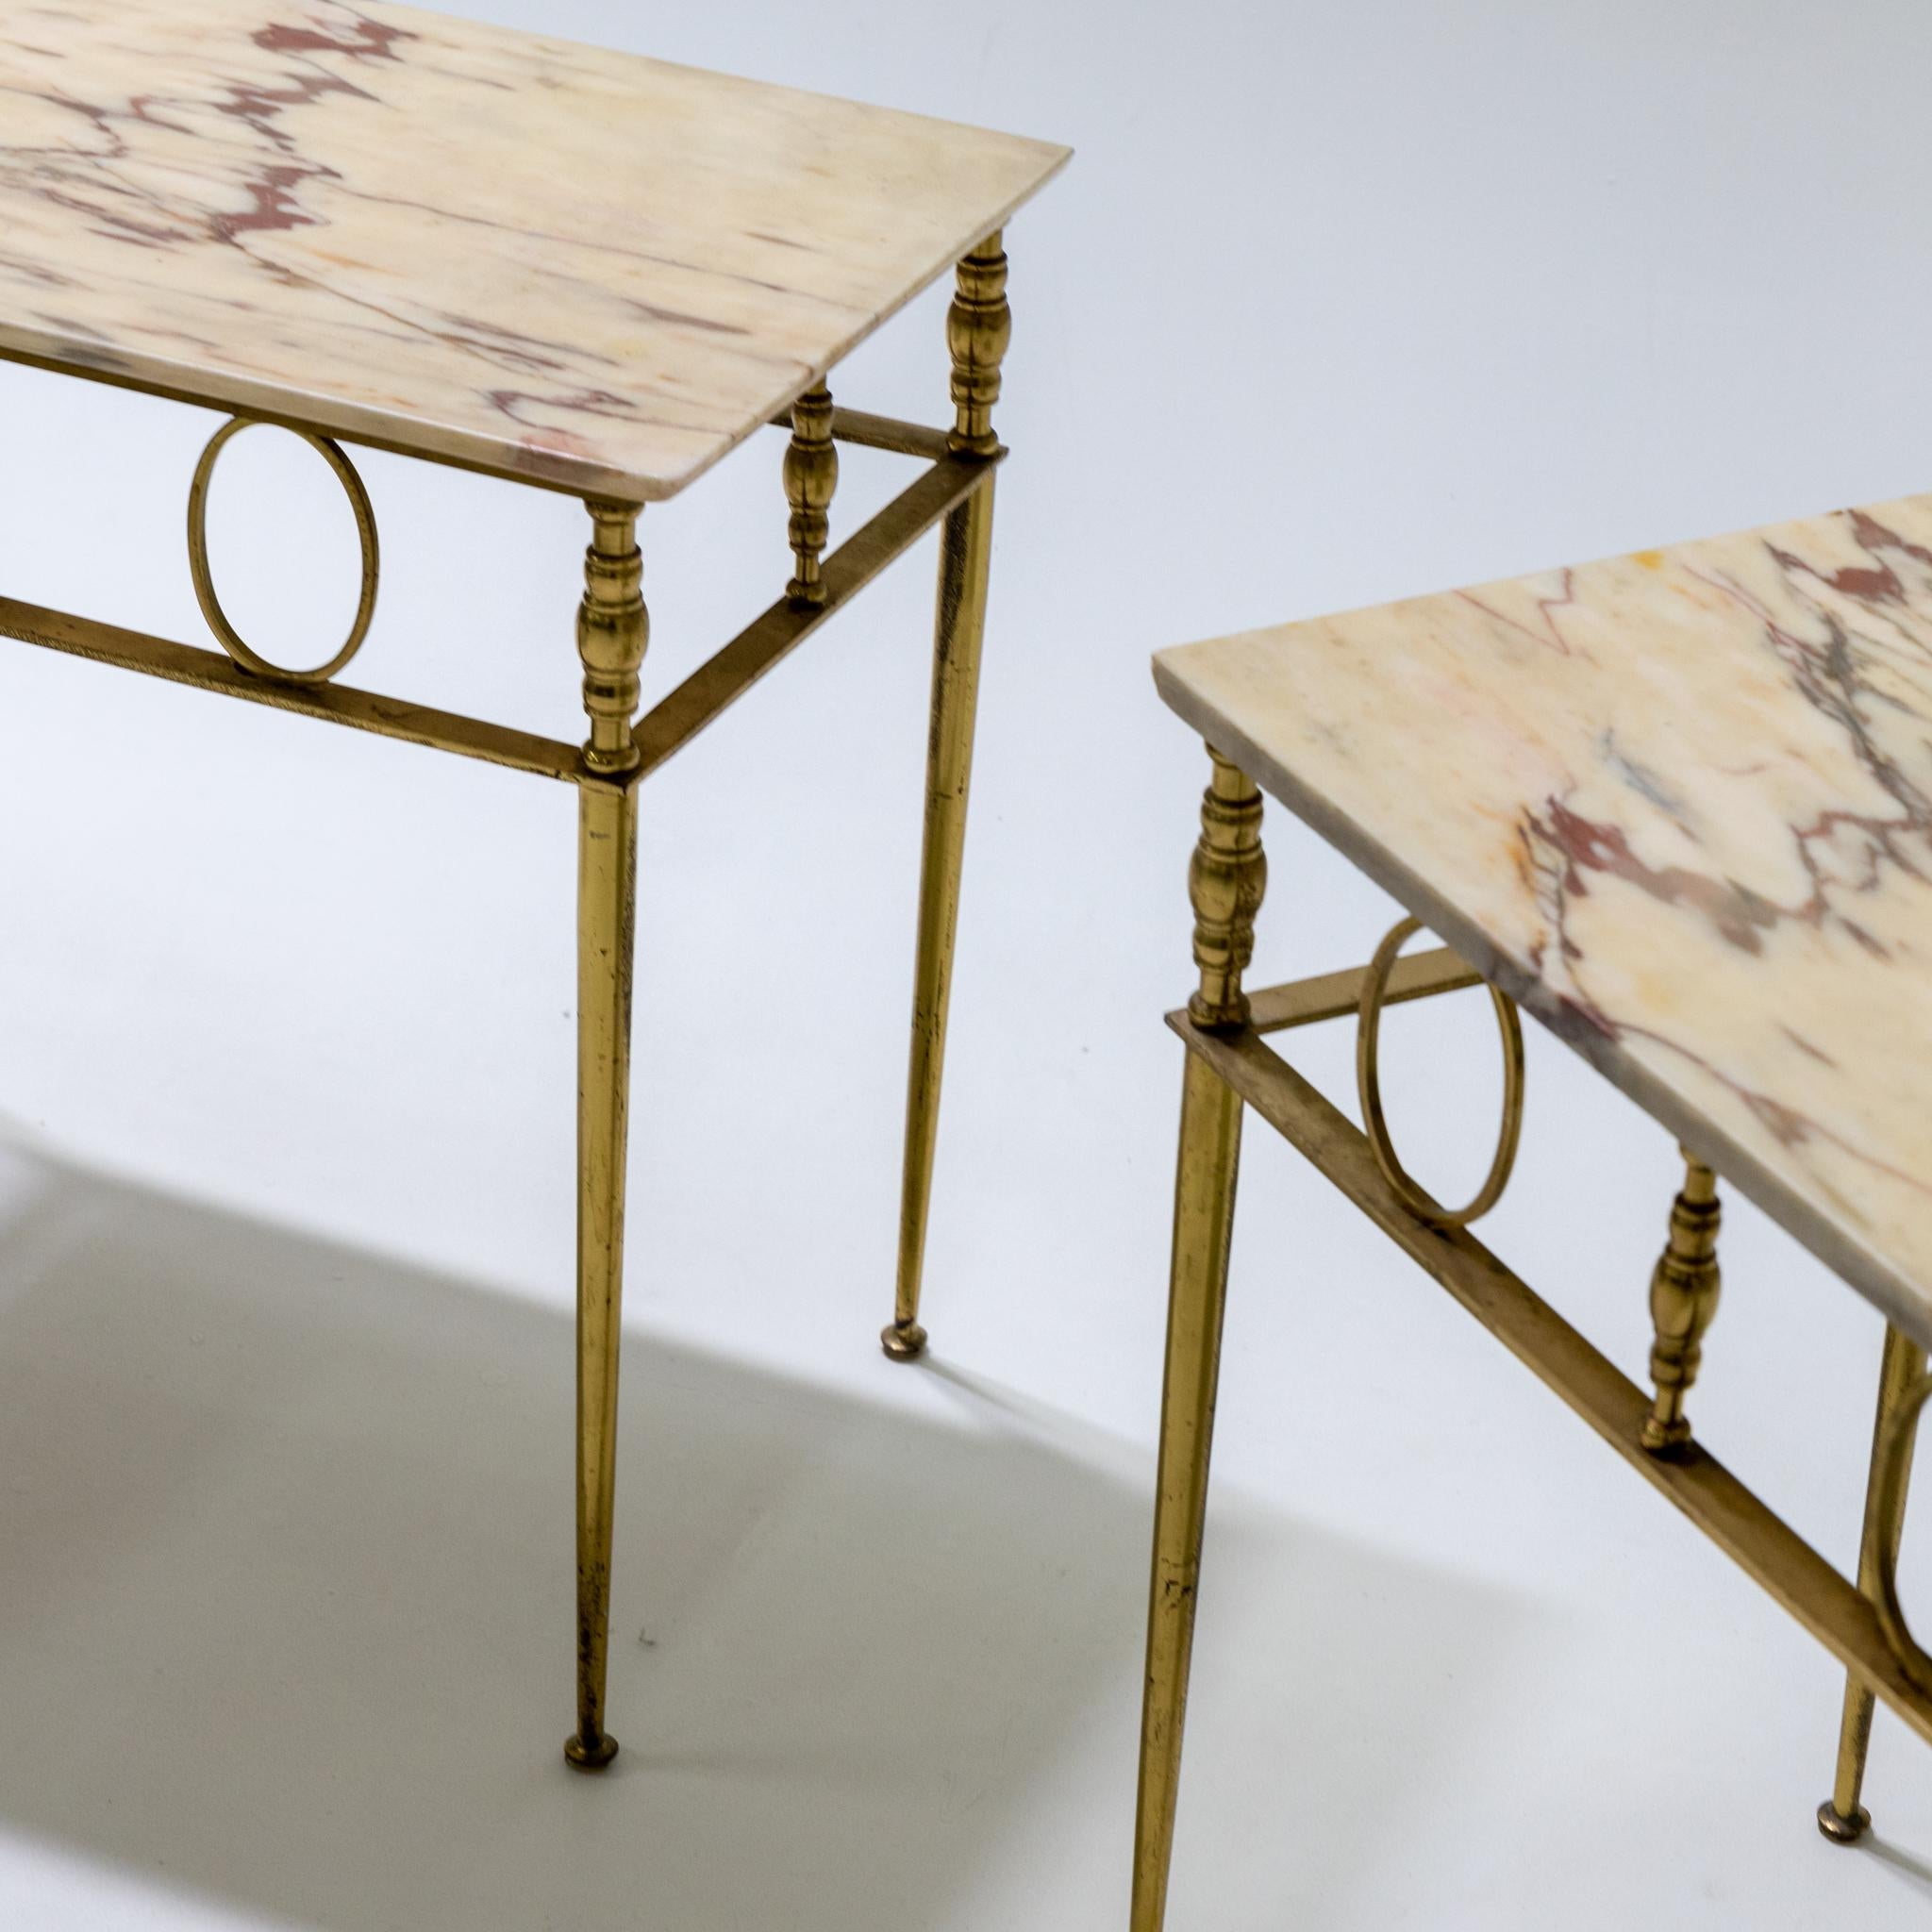 Modern Bedside Tables, Italy Mid-20th Century